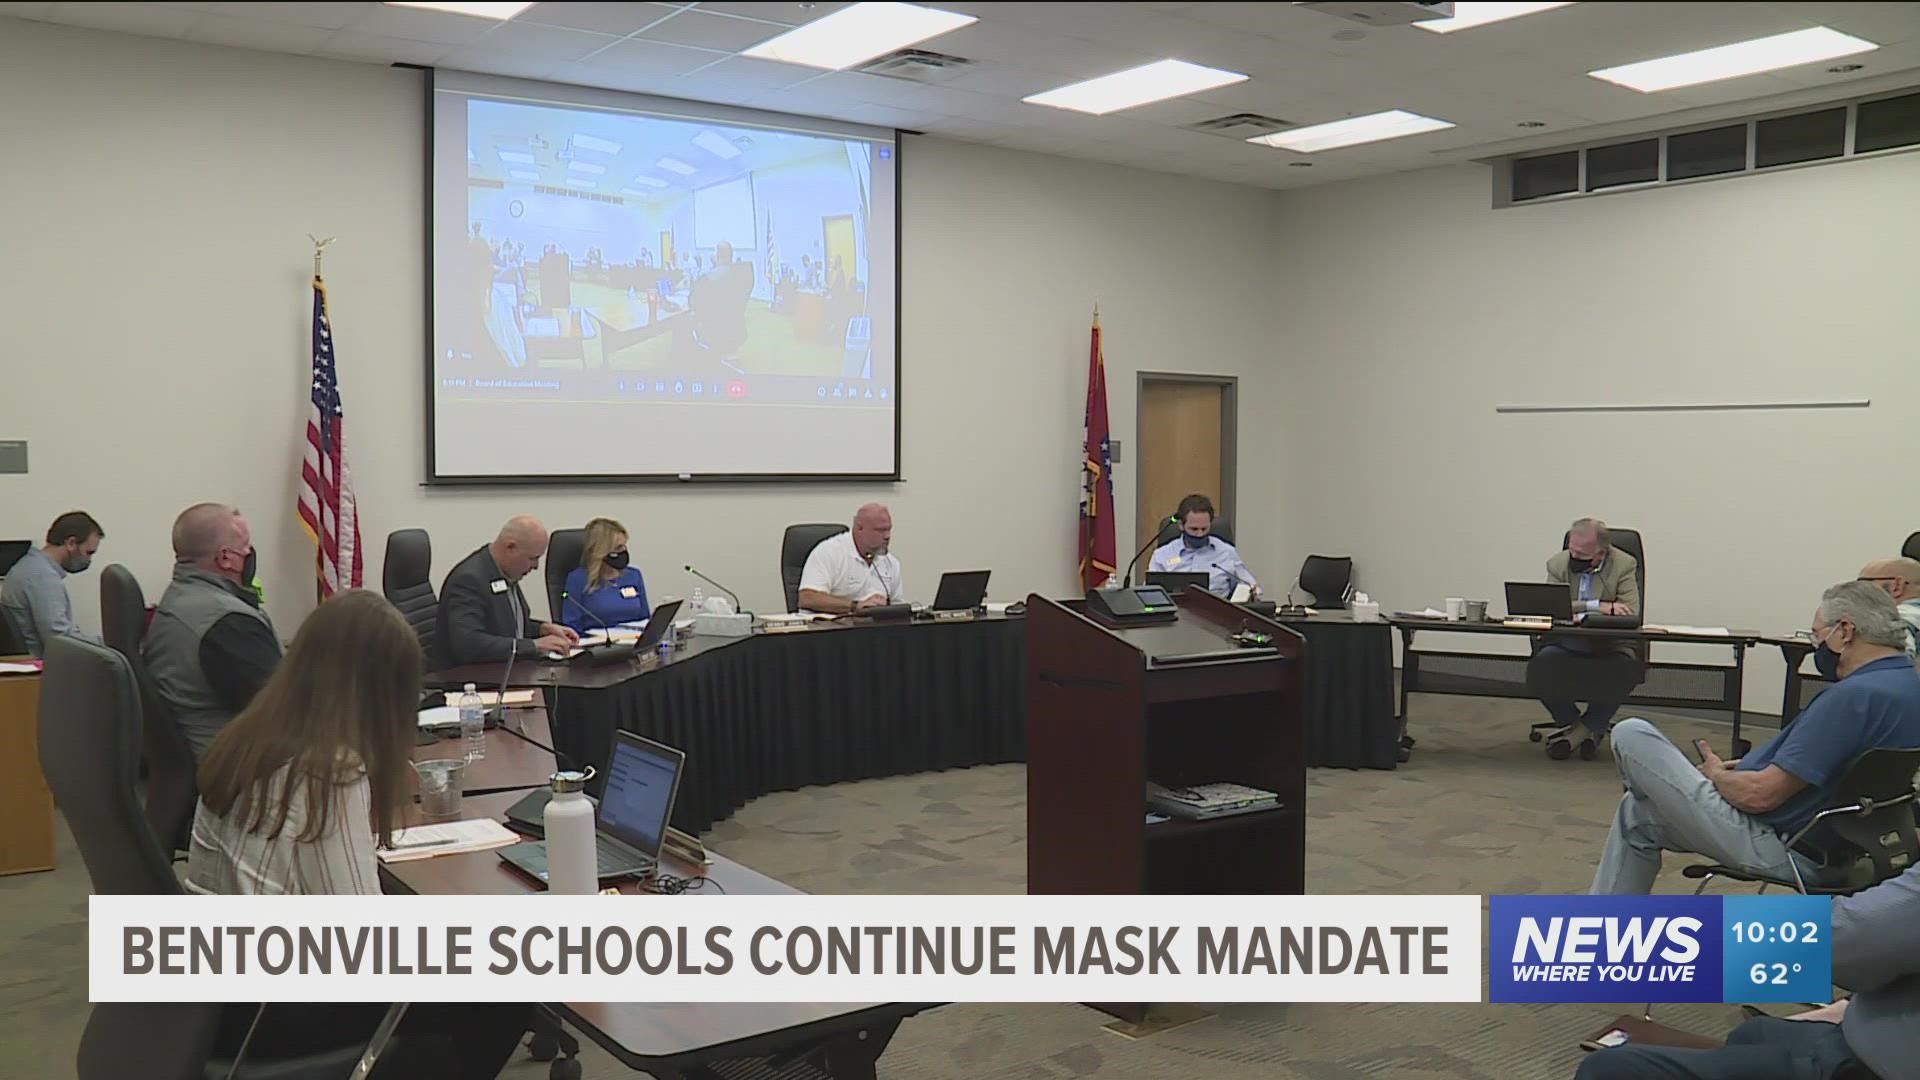 The Bentonville School Board voted in its monthly meeting to keep implementing the district's mask policy.